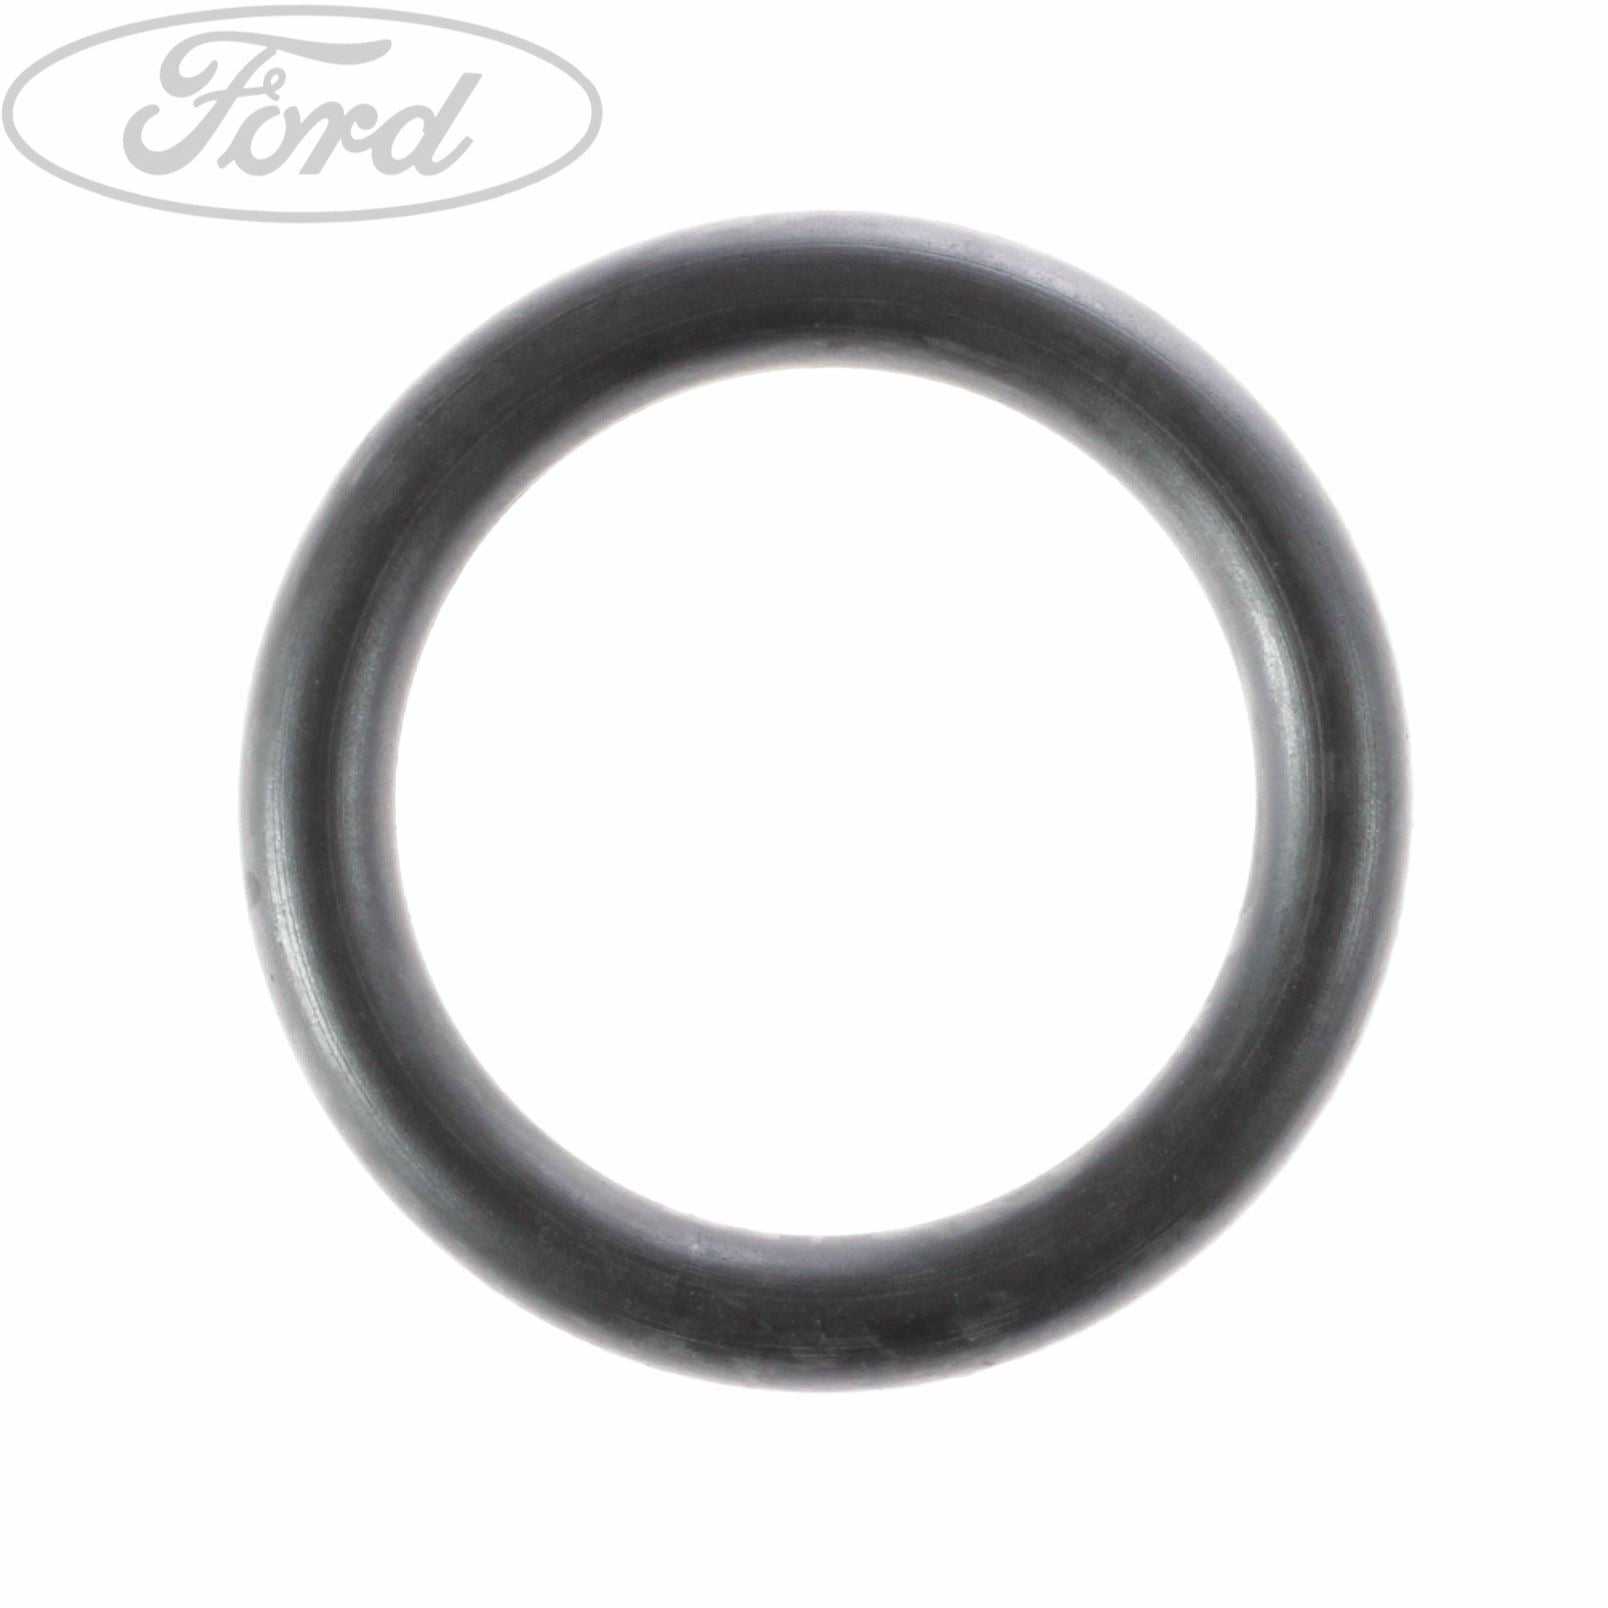 Ford, THERMOSTAT HOUSING GASKET